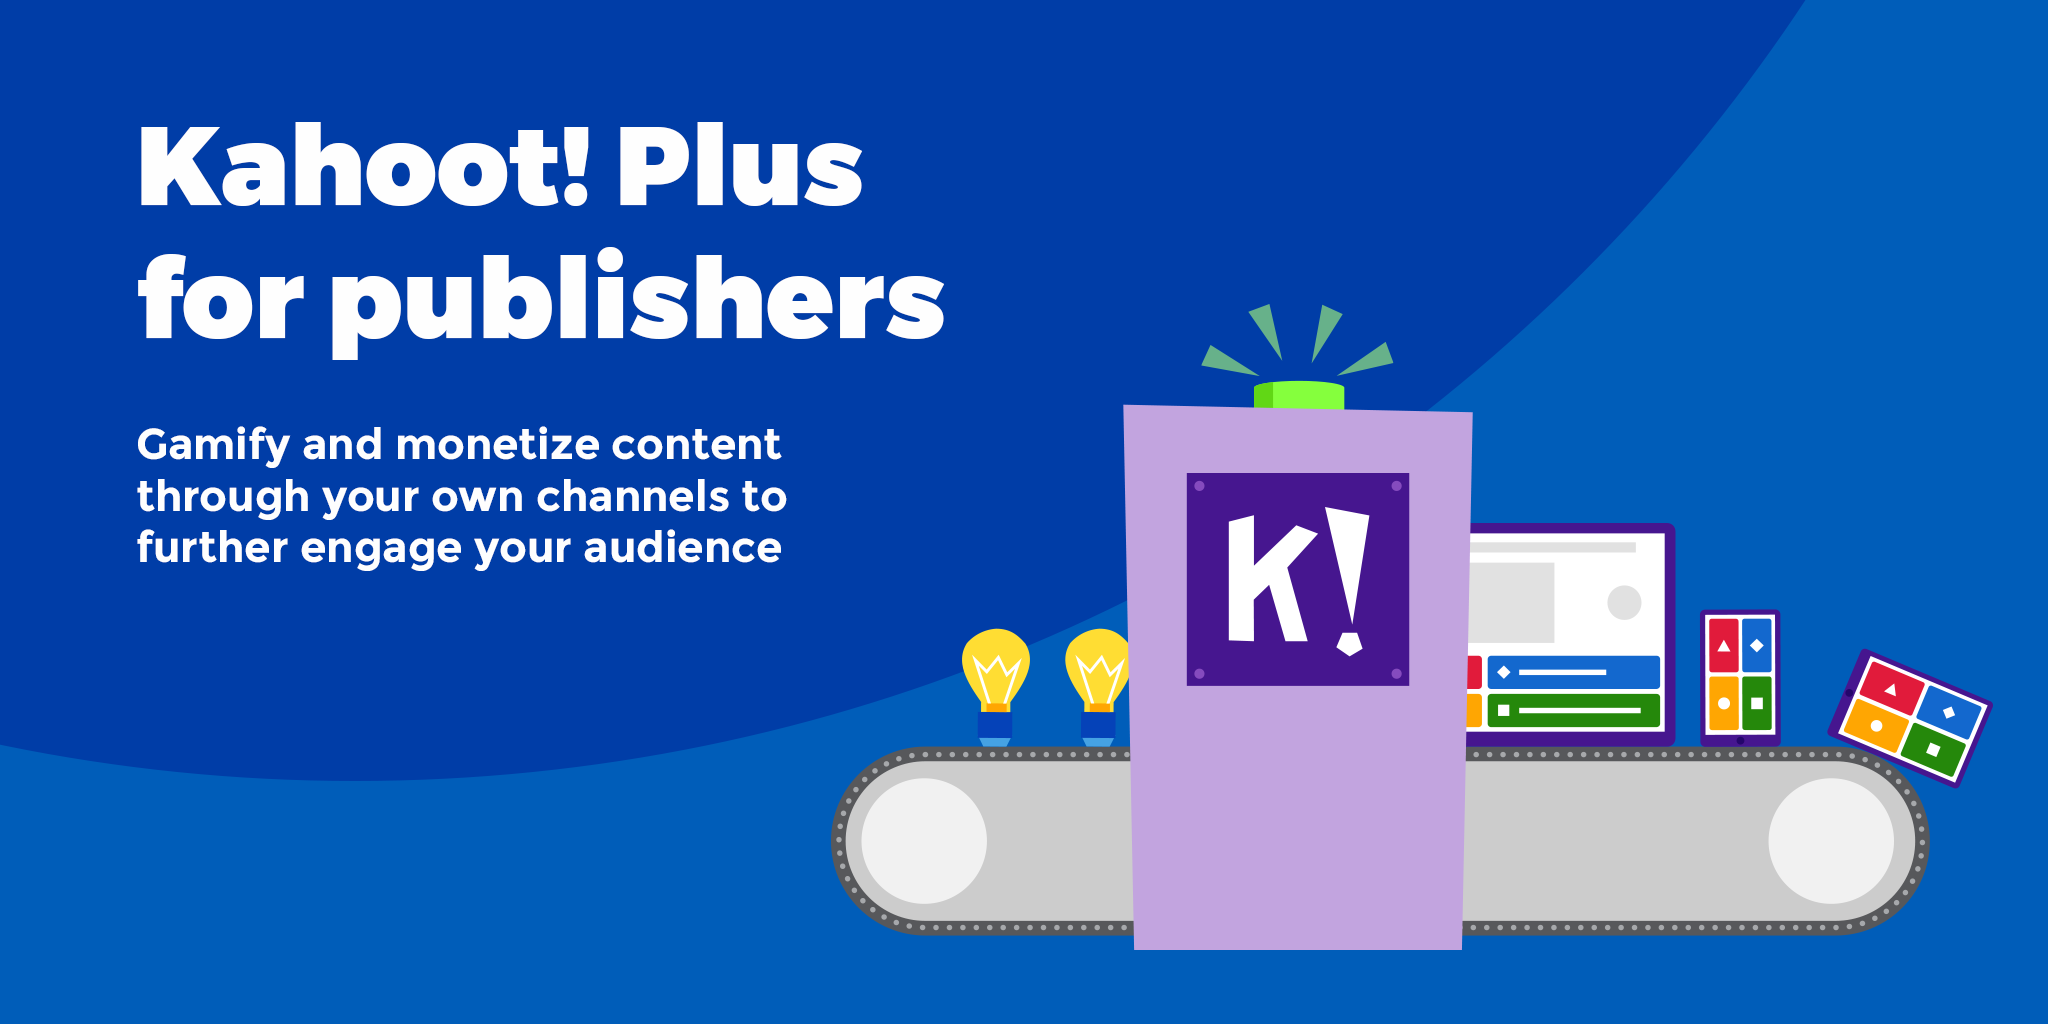 Kahoot! launches new offering for publishers